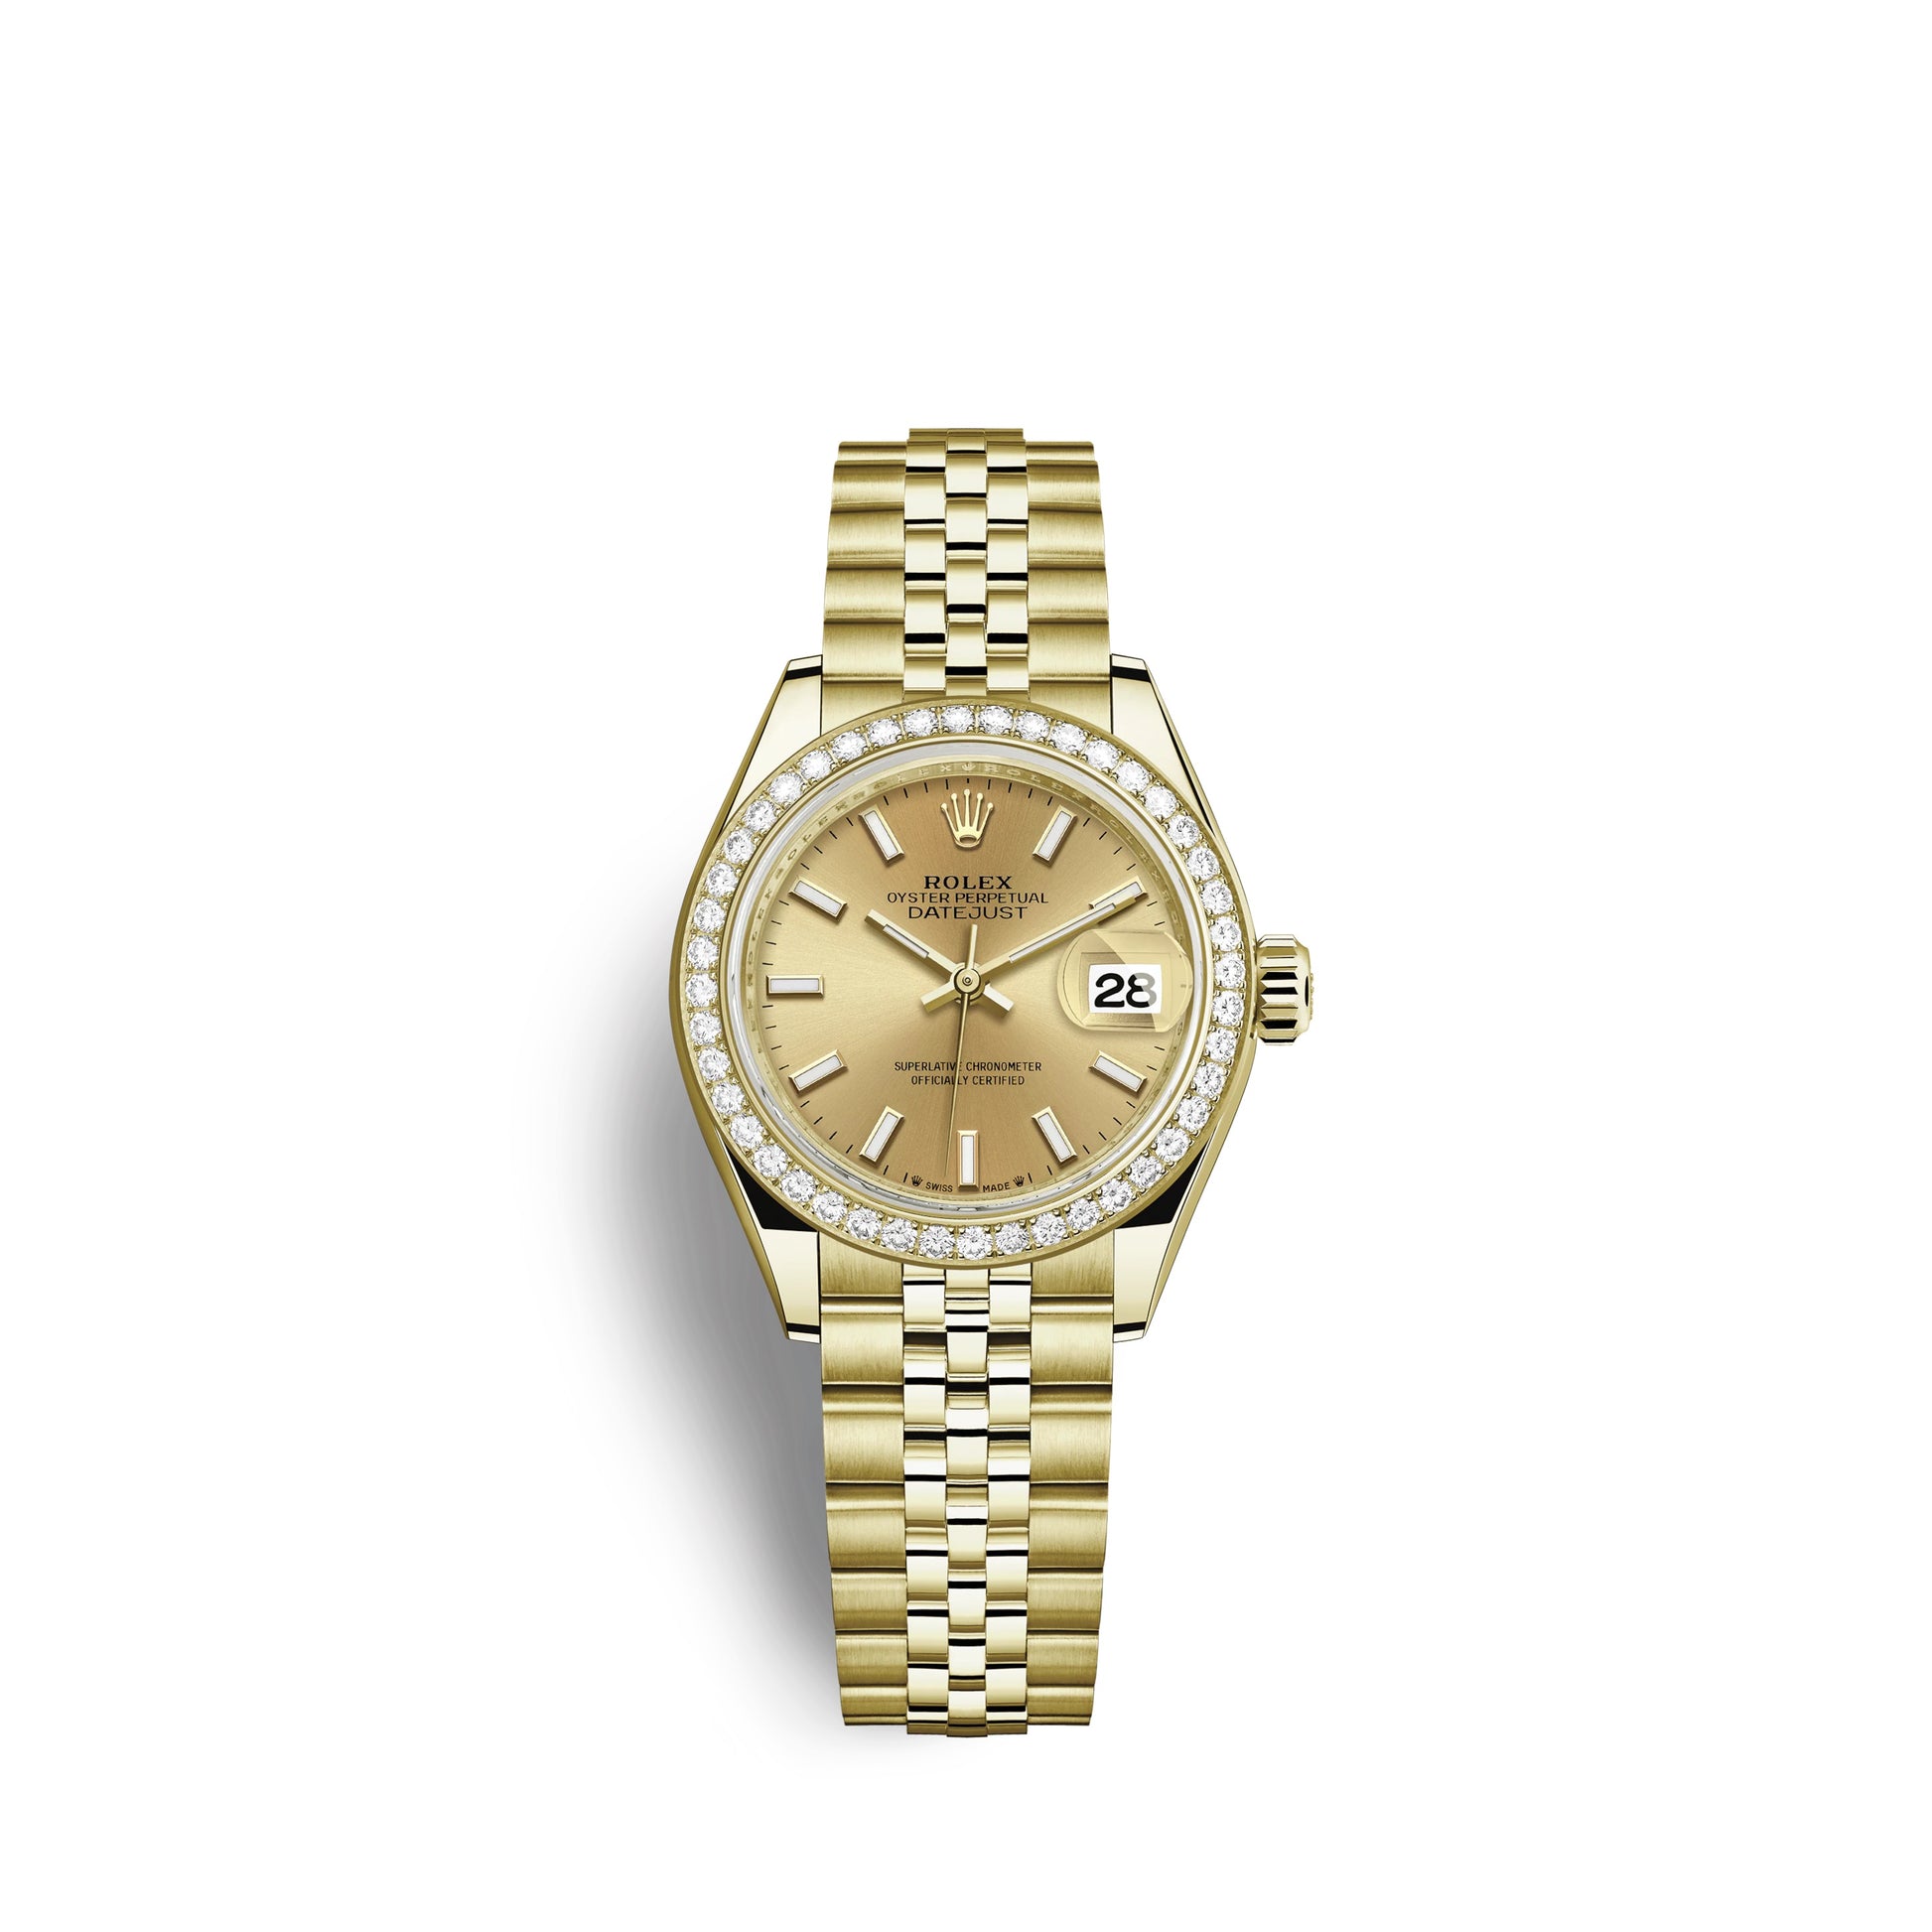 Rolex Lady-Datejust 28, 18kt Yellow Gold and diamonds, Ref# 279138RBR-0013